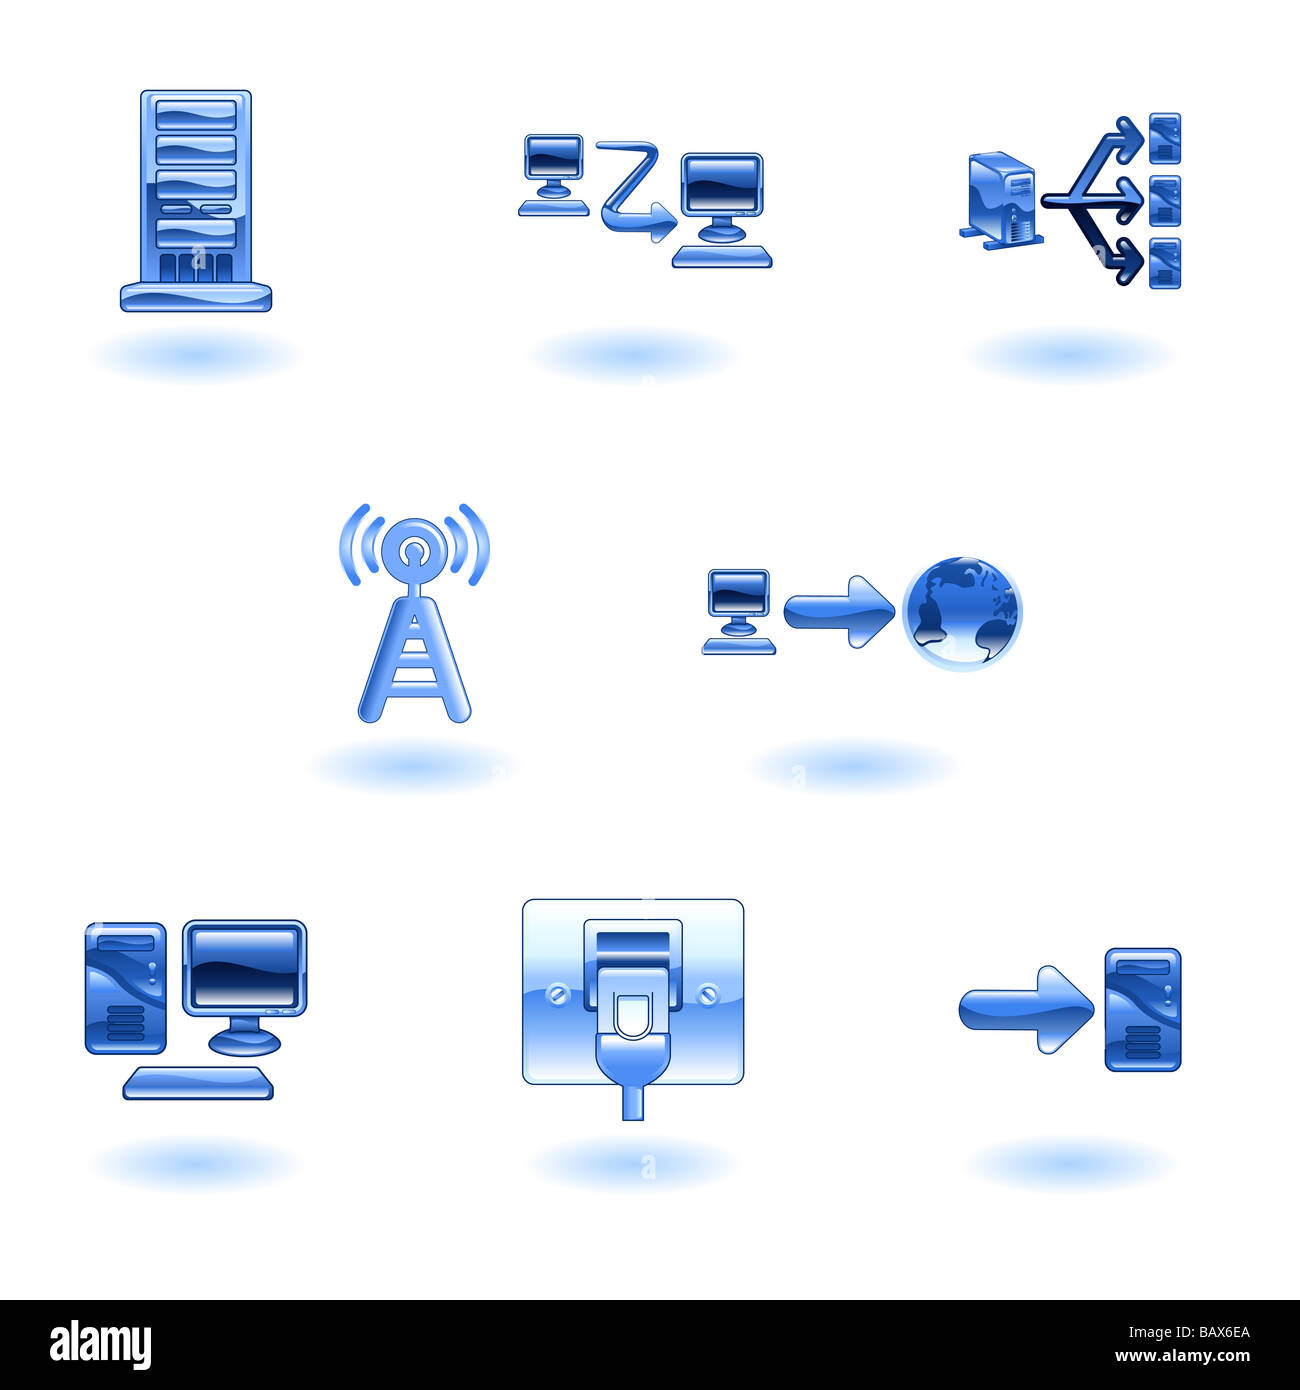 A glossy computer network and internet icon set Stock Photo